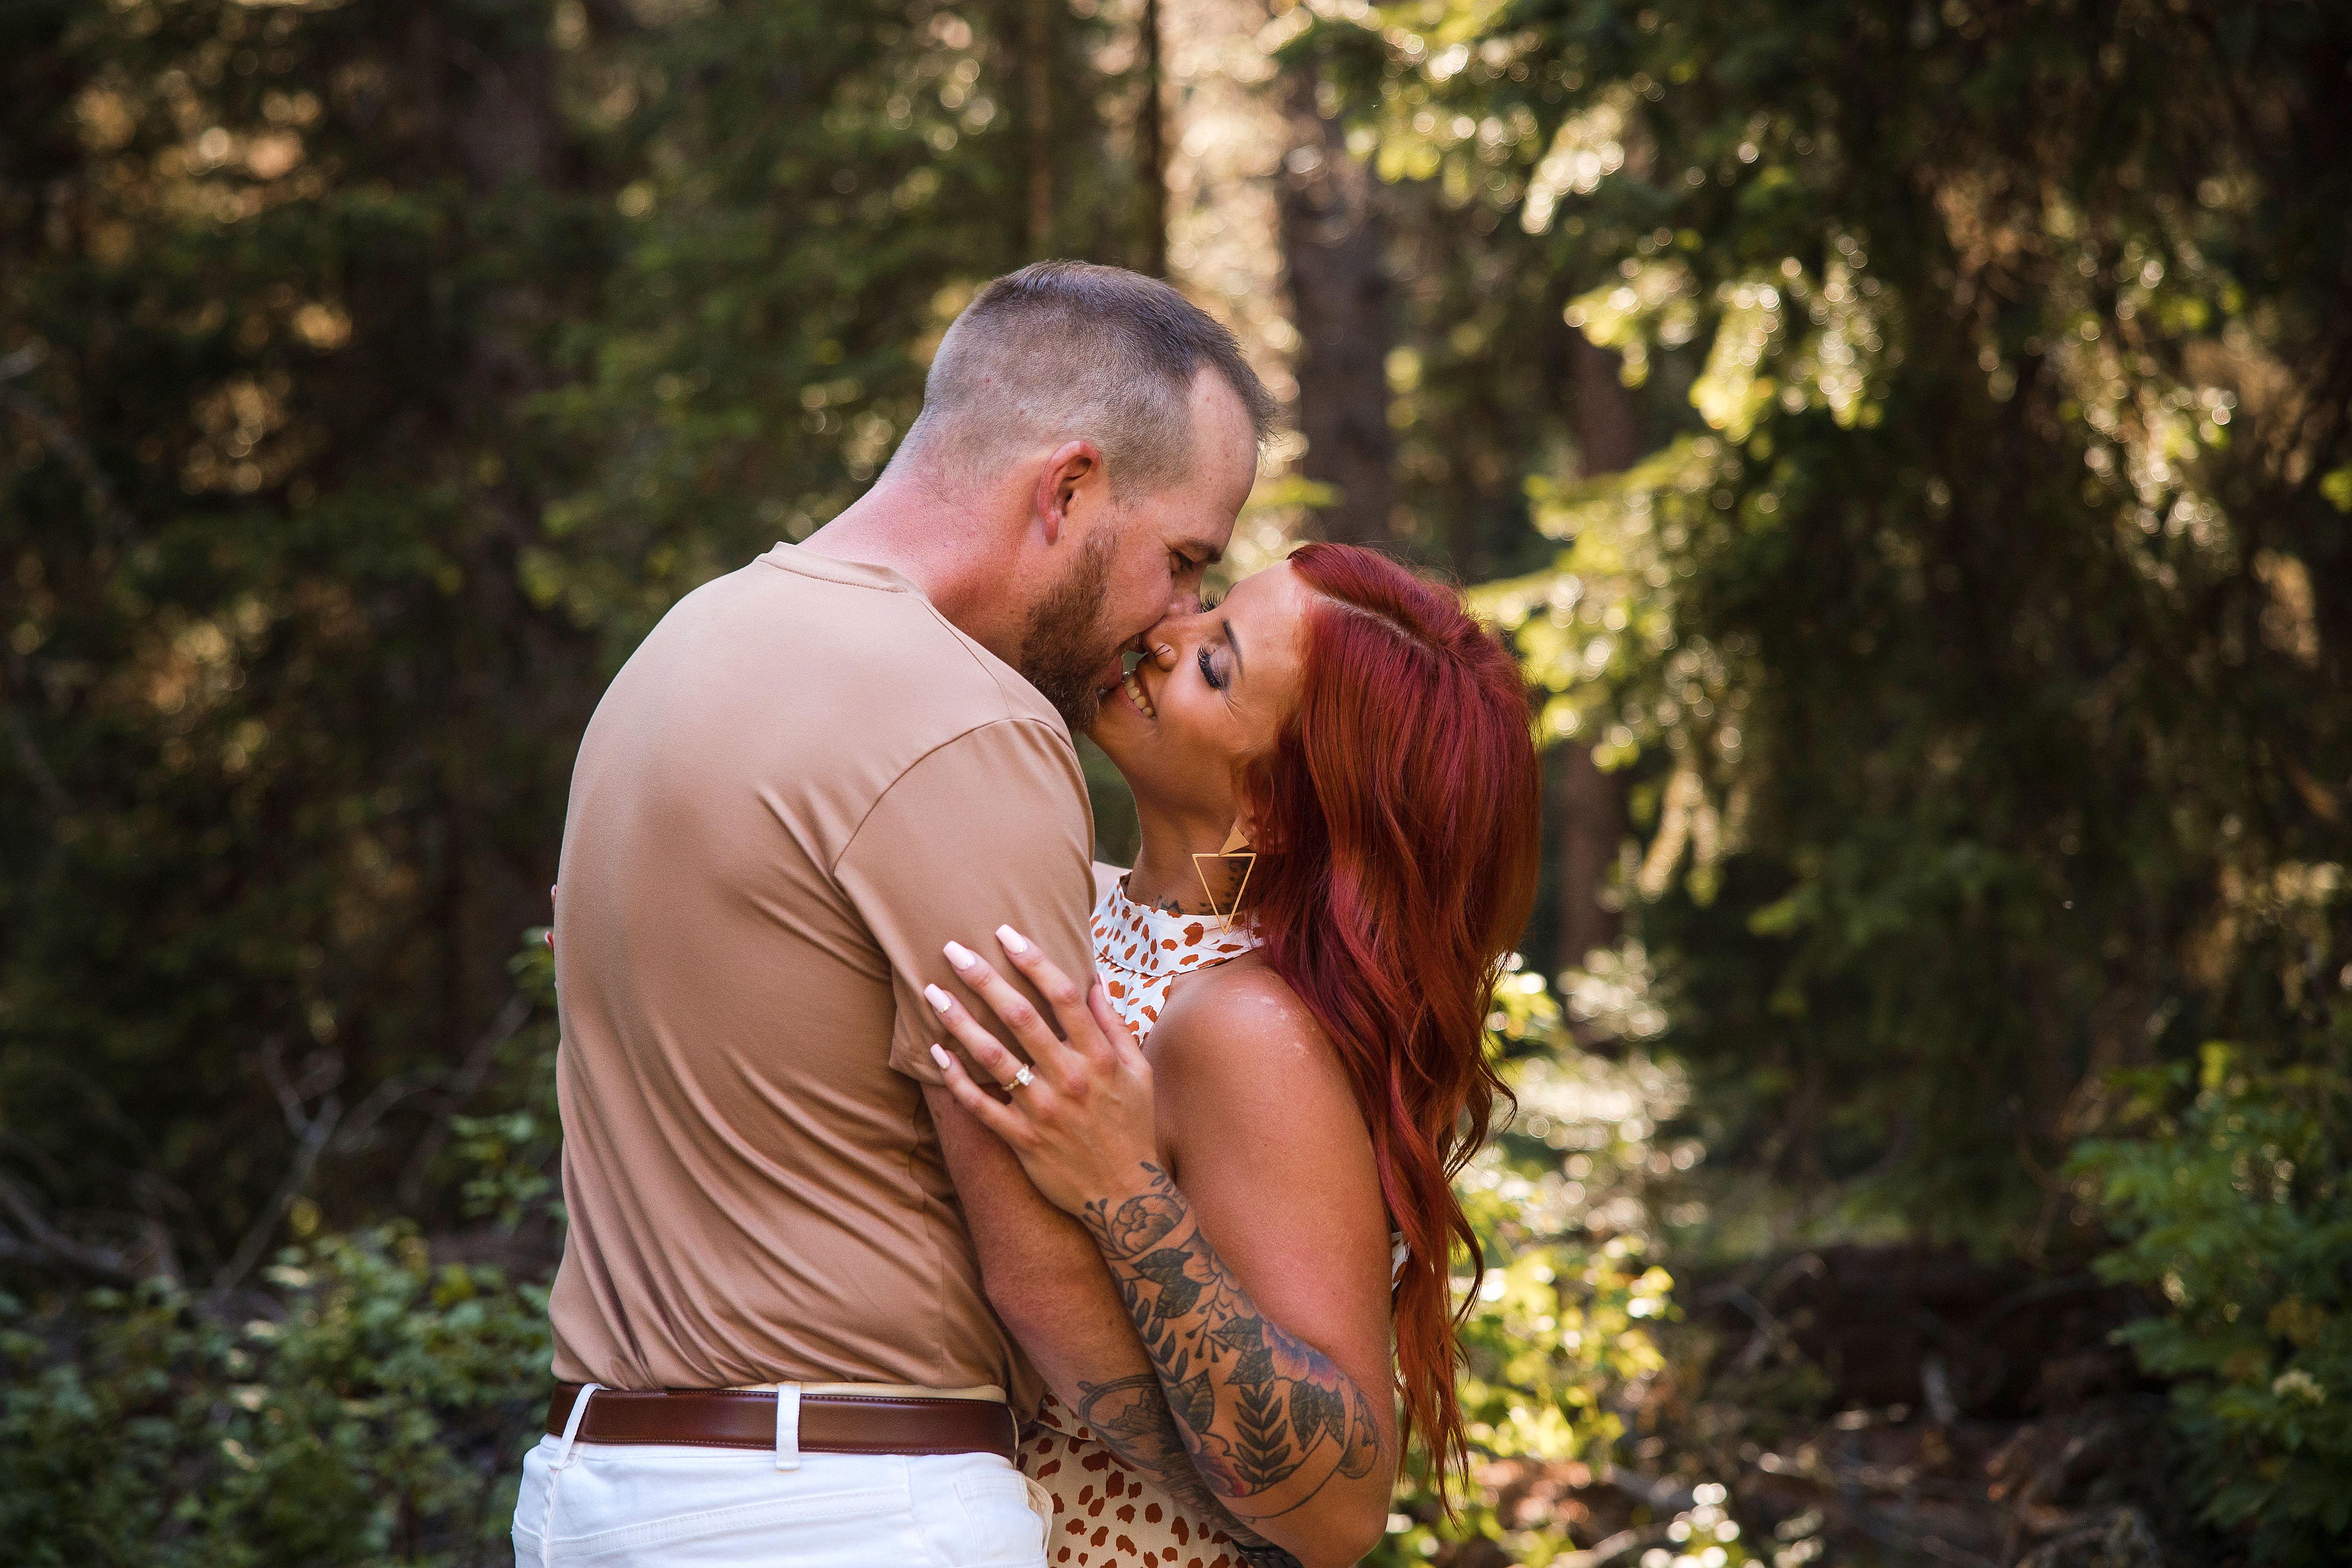 The Wedding Website of Ashlee Marie and Zachary Lunder